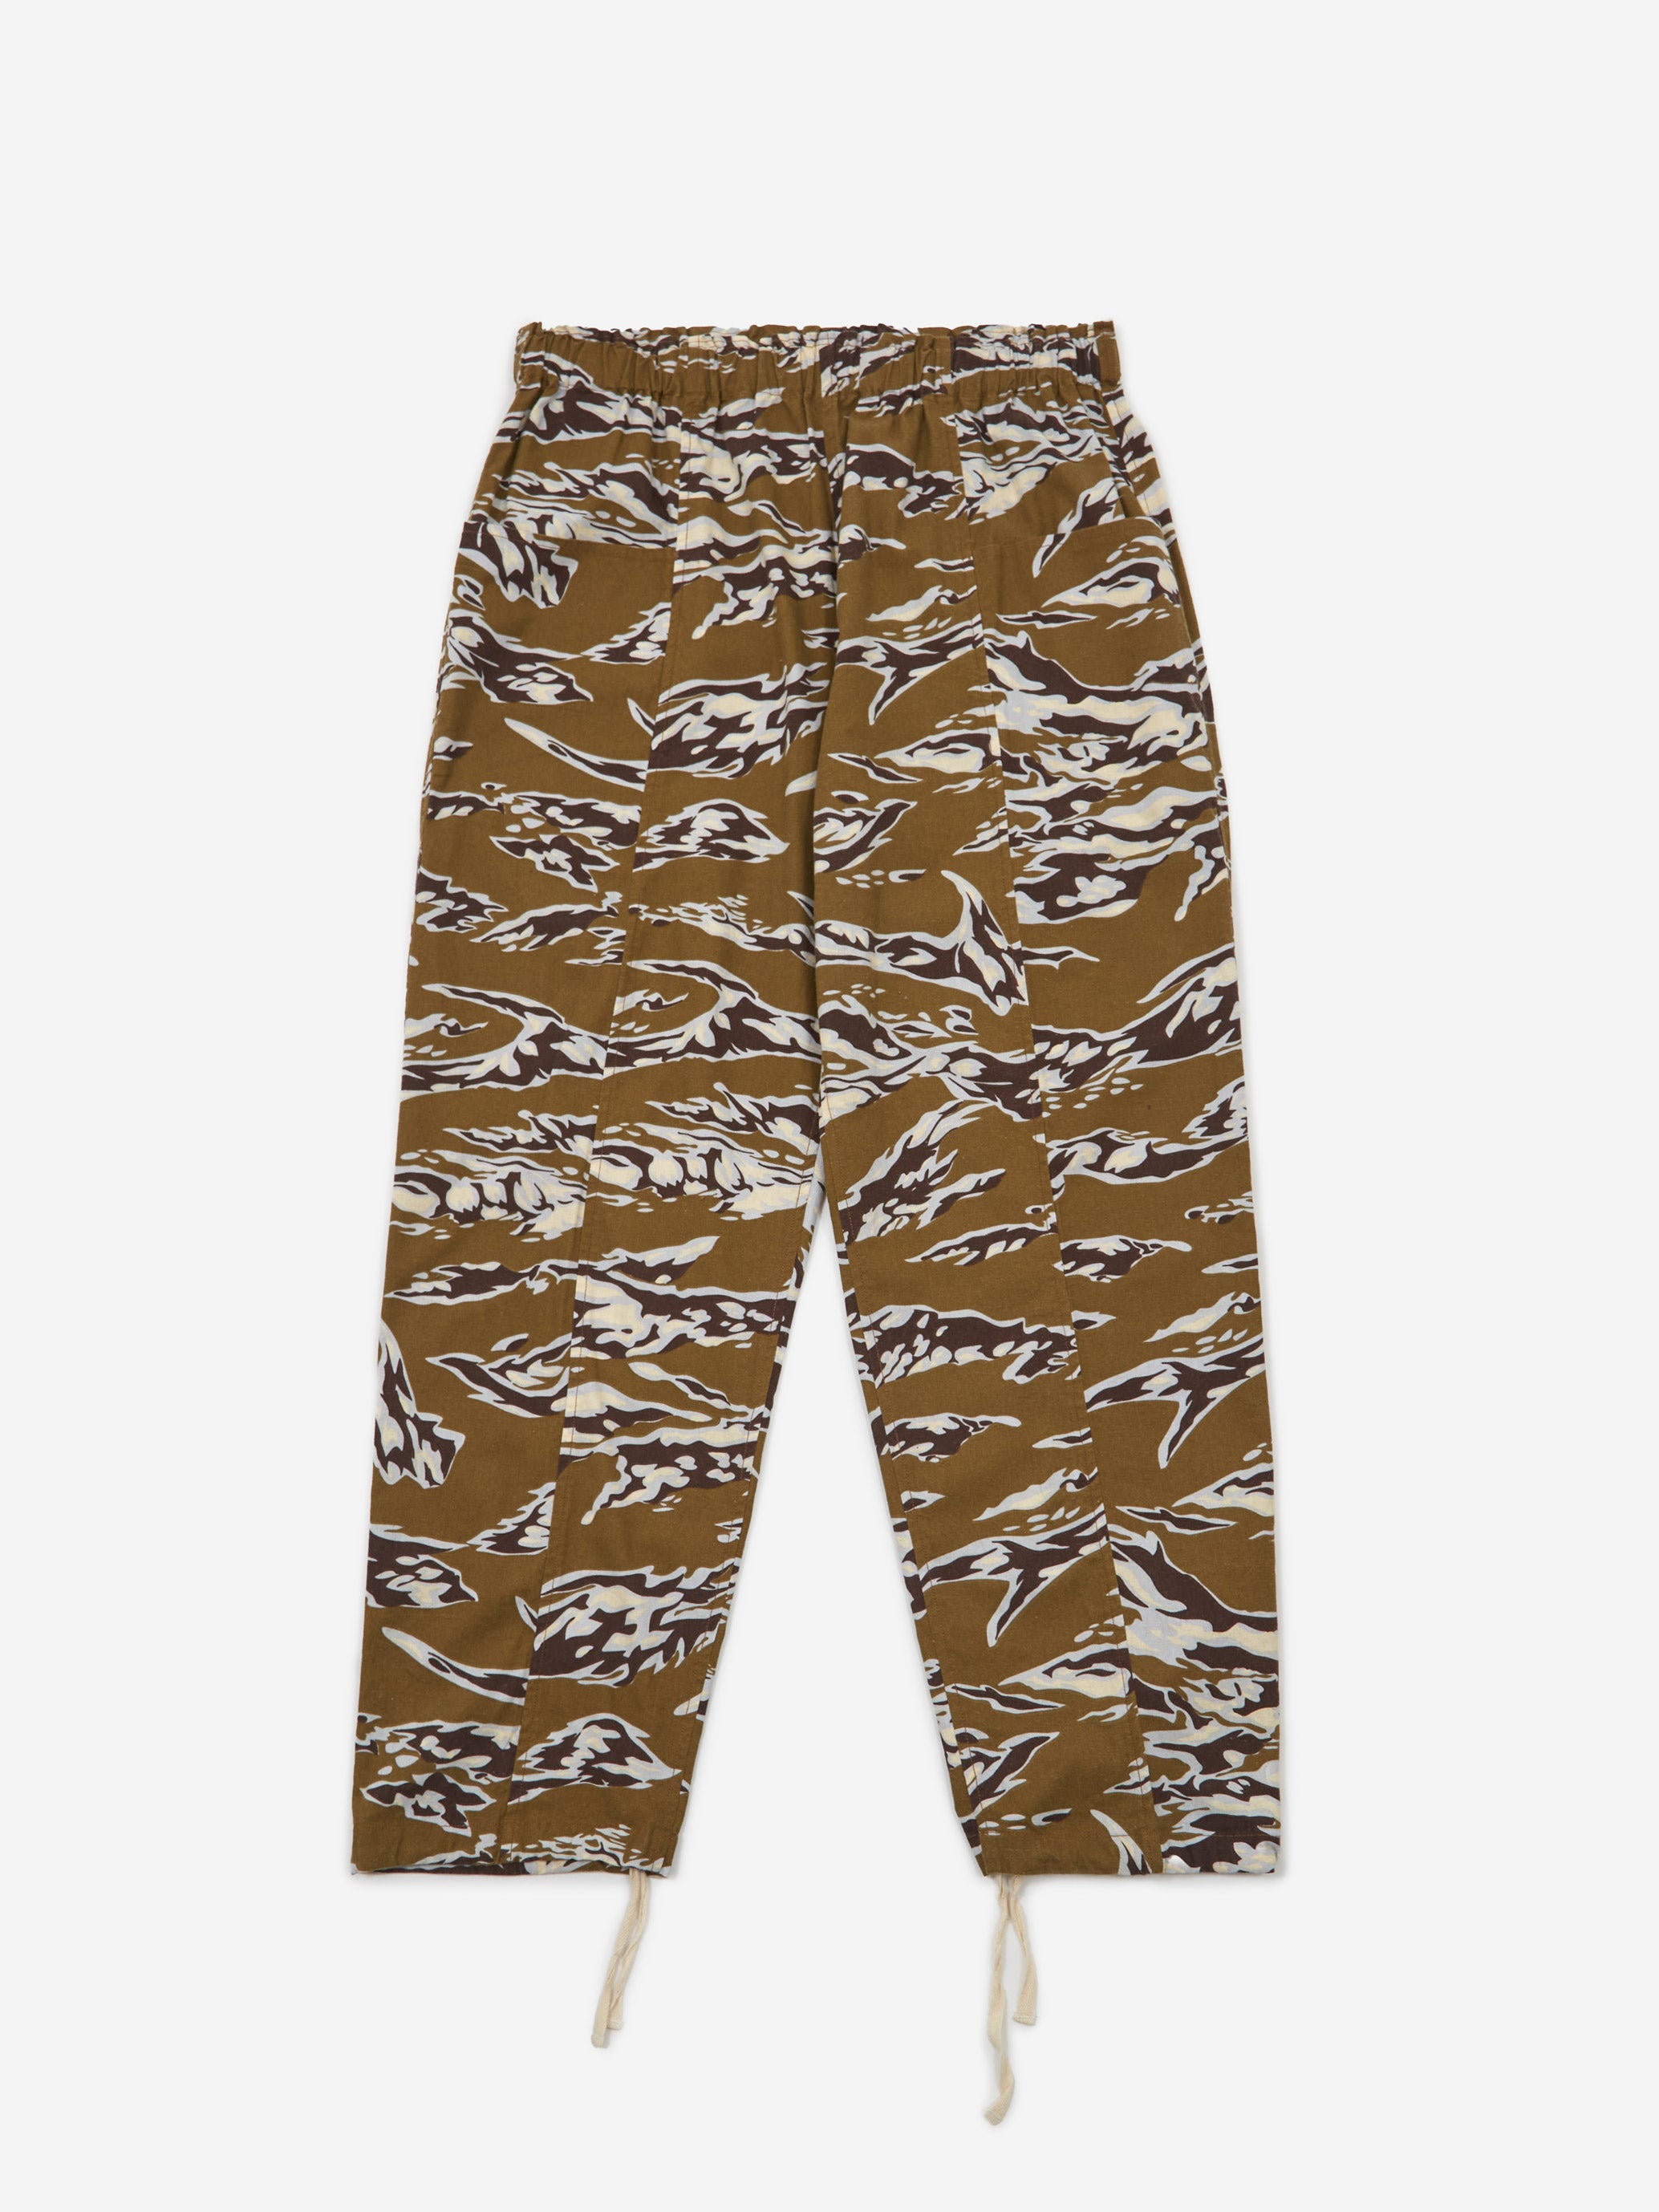 South2 West8 HUNTING PANTS TIGER CAMO S-